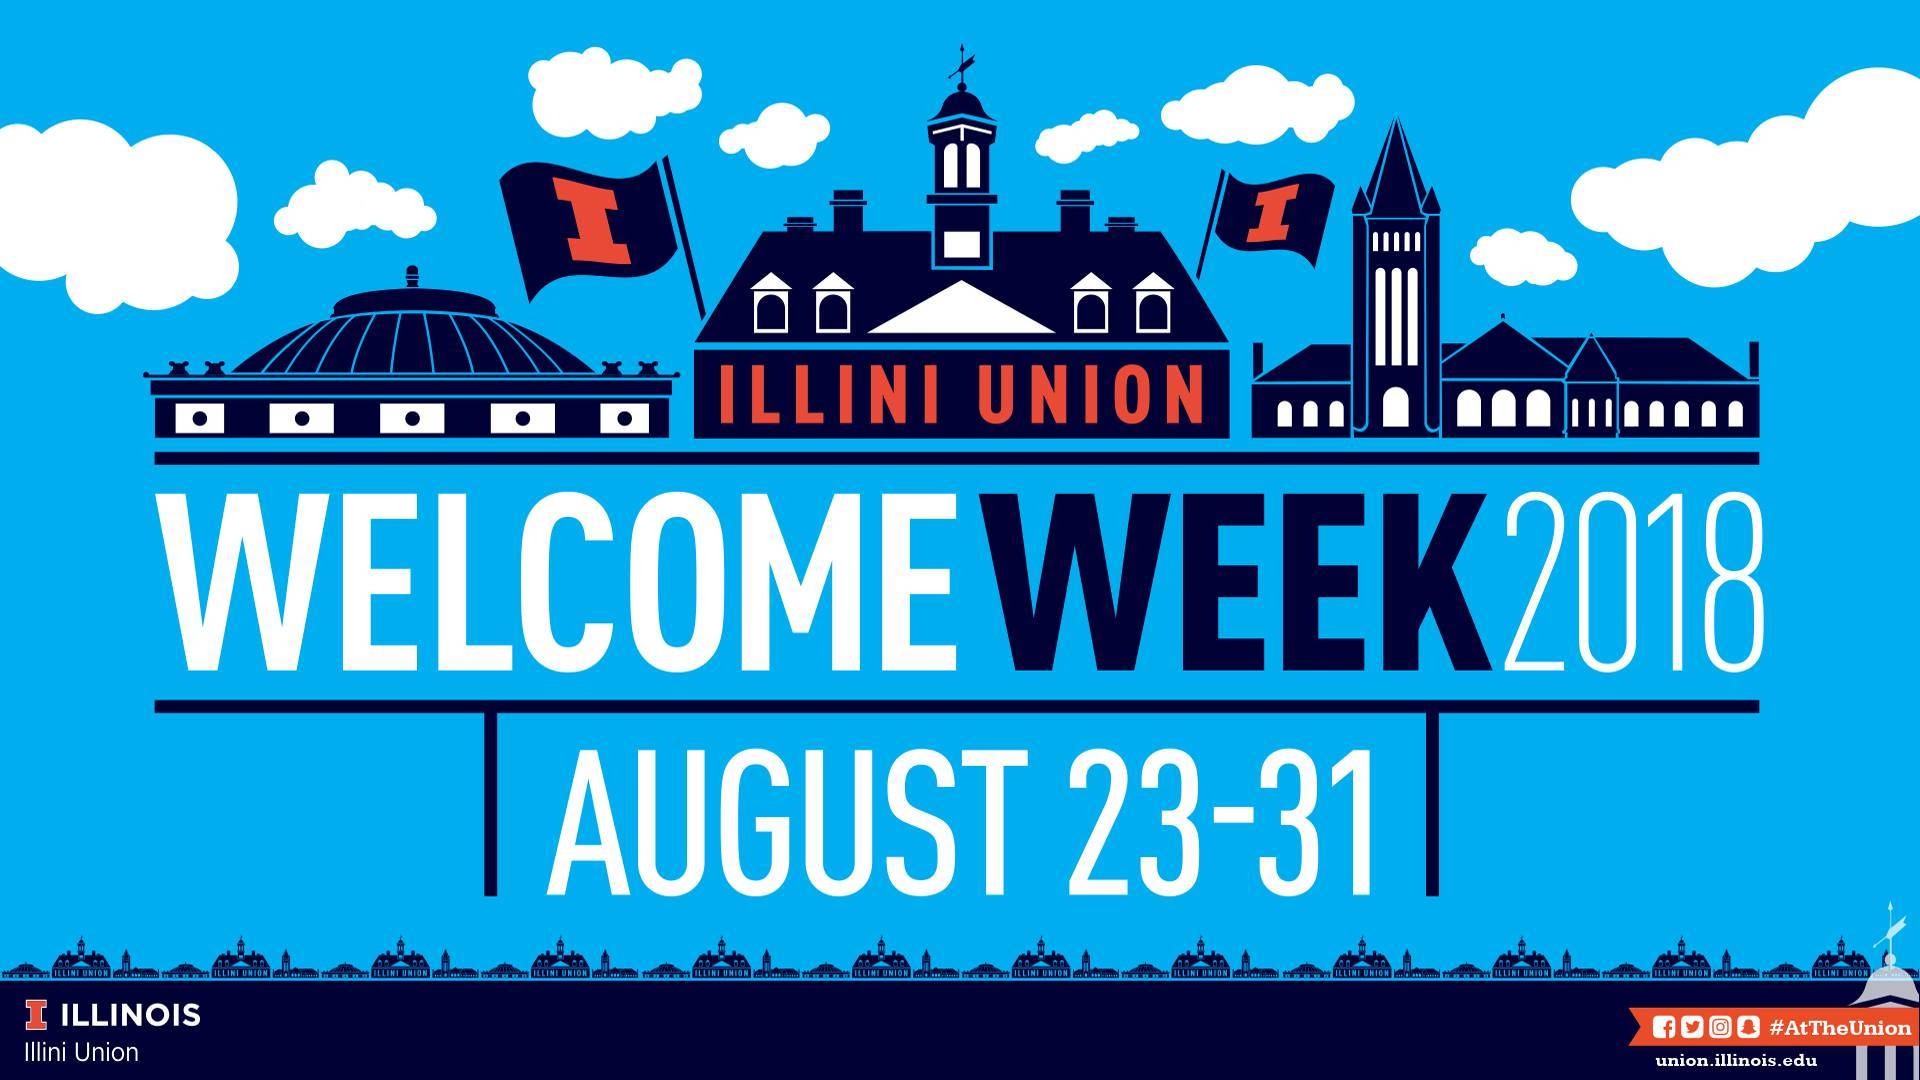 The Illini Union is doing First Day of School photos, which is kind of awesome